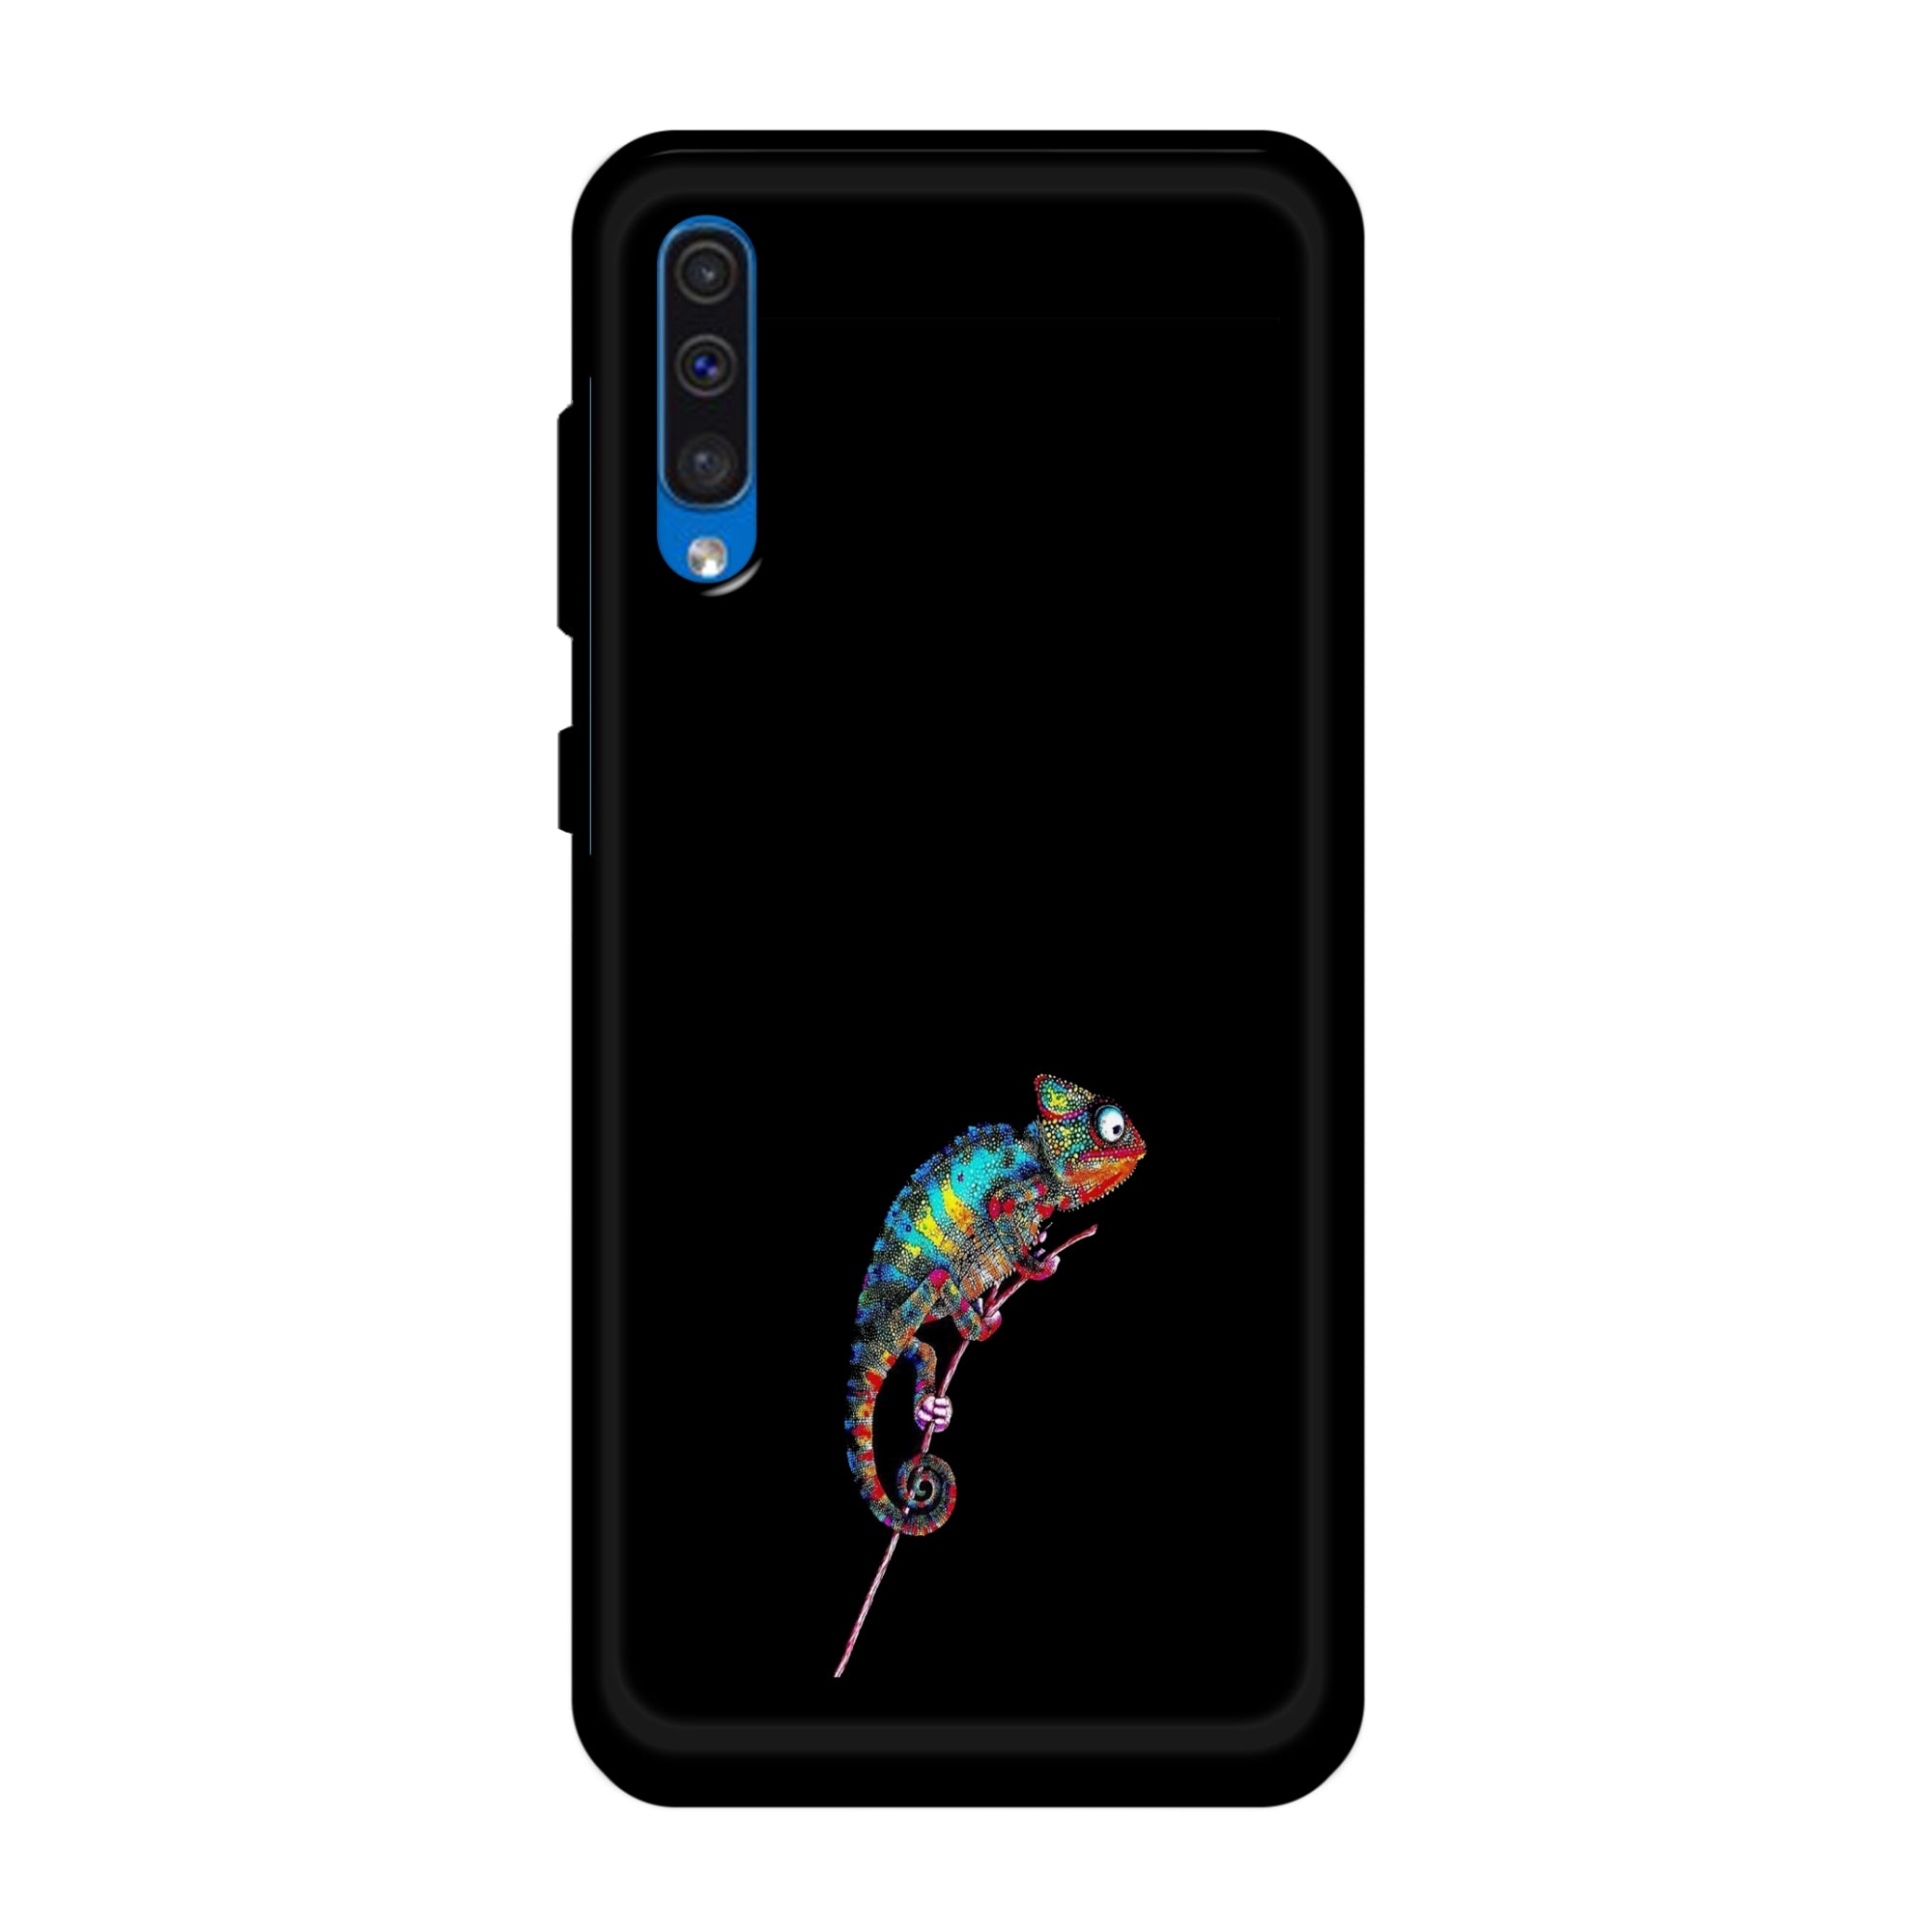 Buy Chamaeleon Metal-Silicon Back Mobile Phone Case/Cover For Samsung Galaxy A50 / A50s / A30s Online